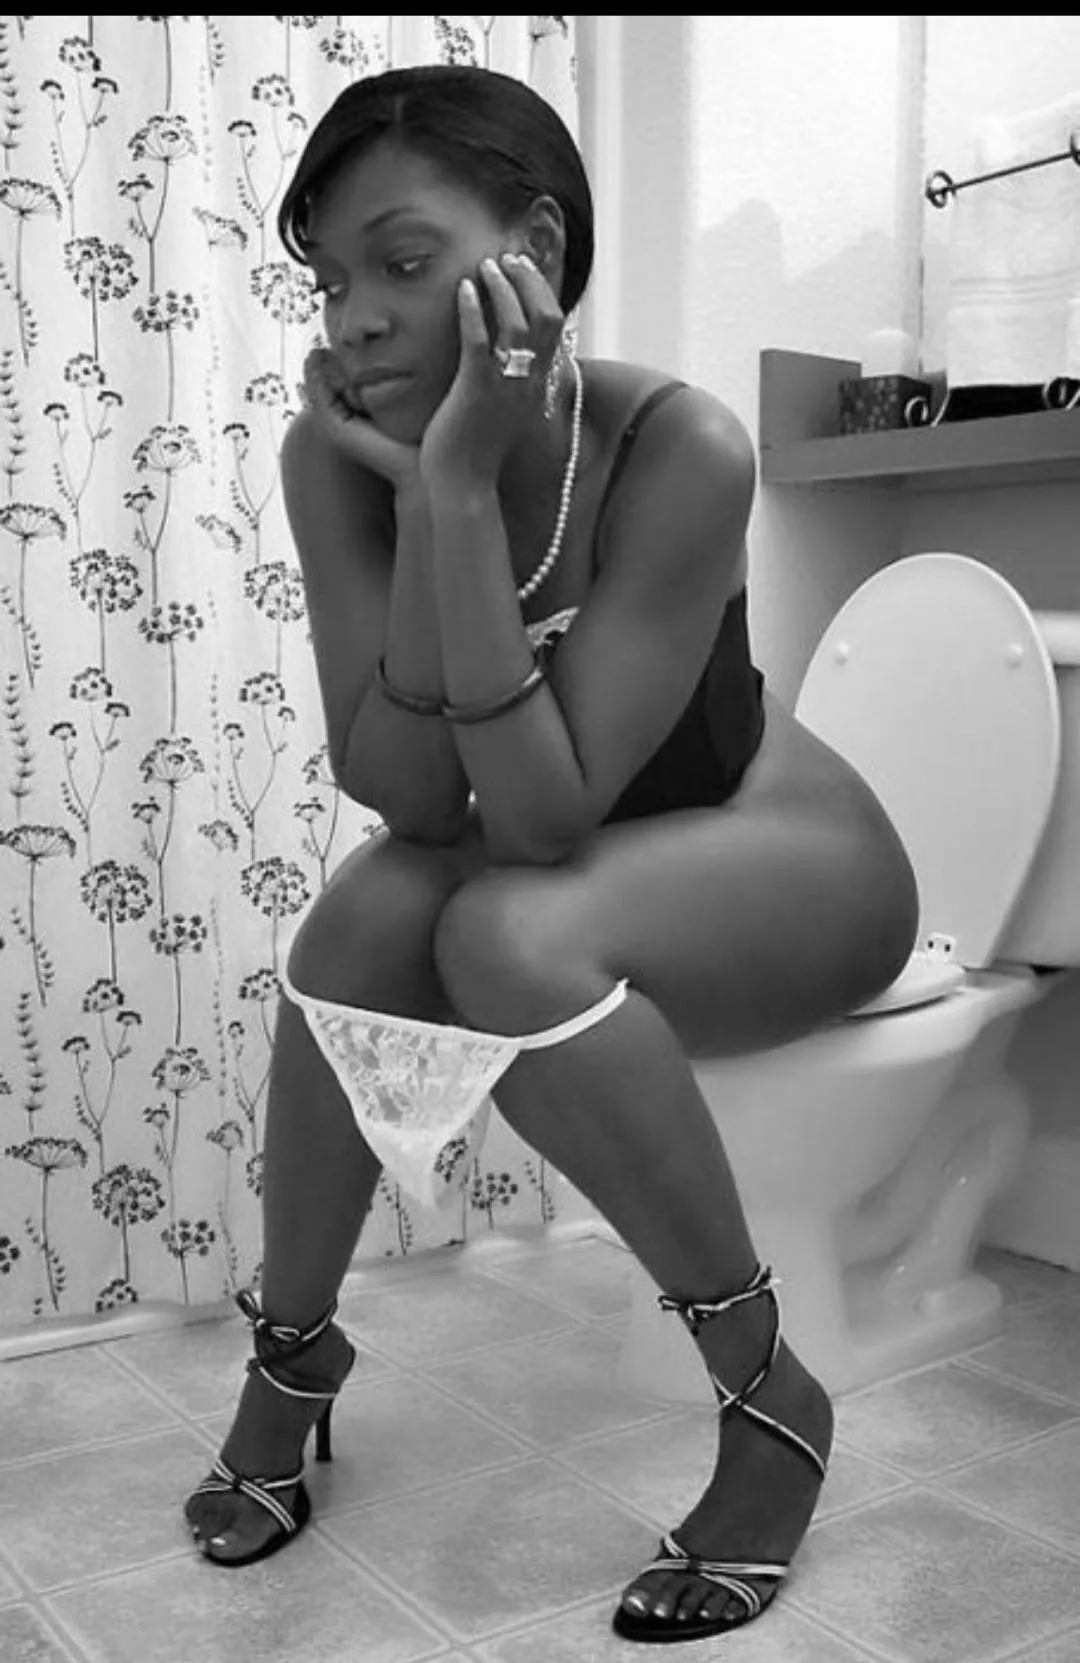 Fat Black Girls Pissing - Big booty black girl. nudes by peeing-girl-lover